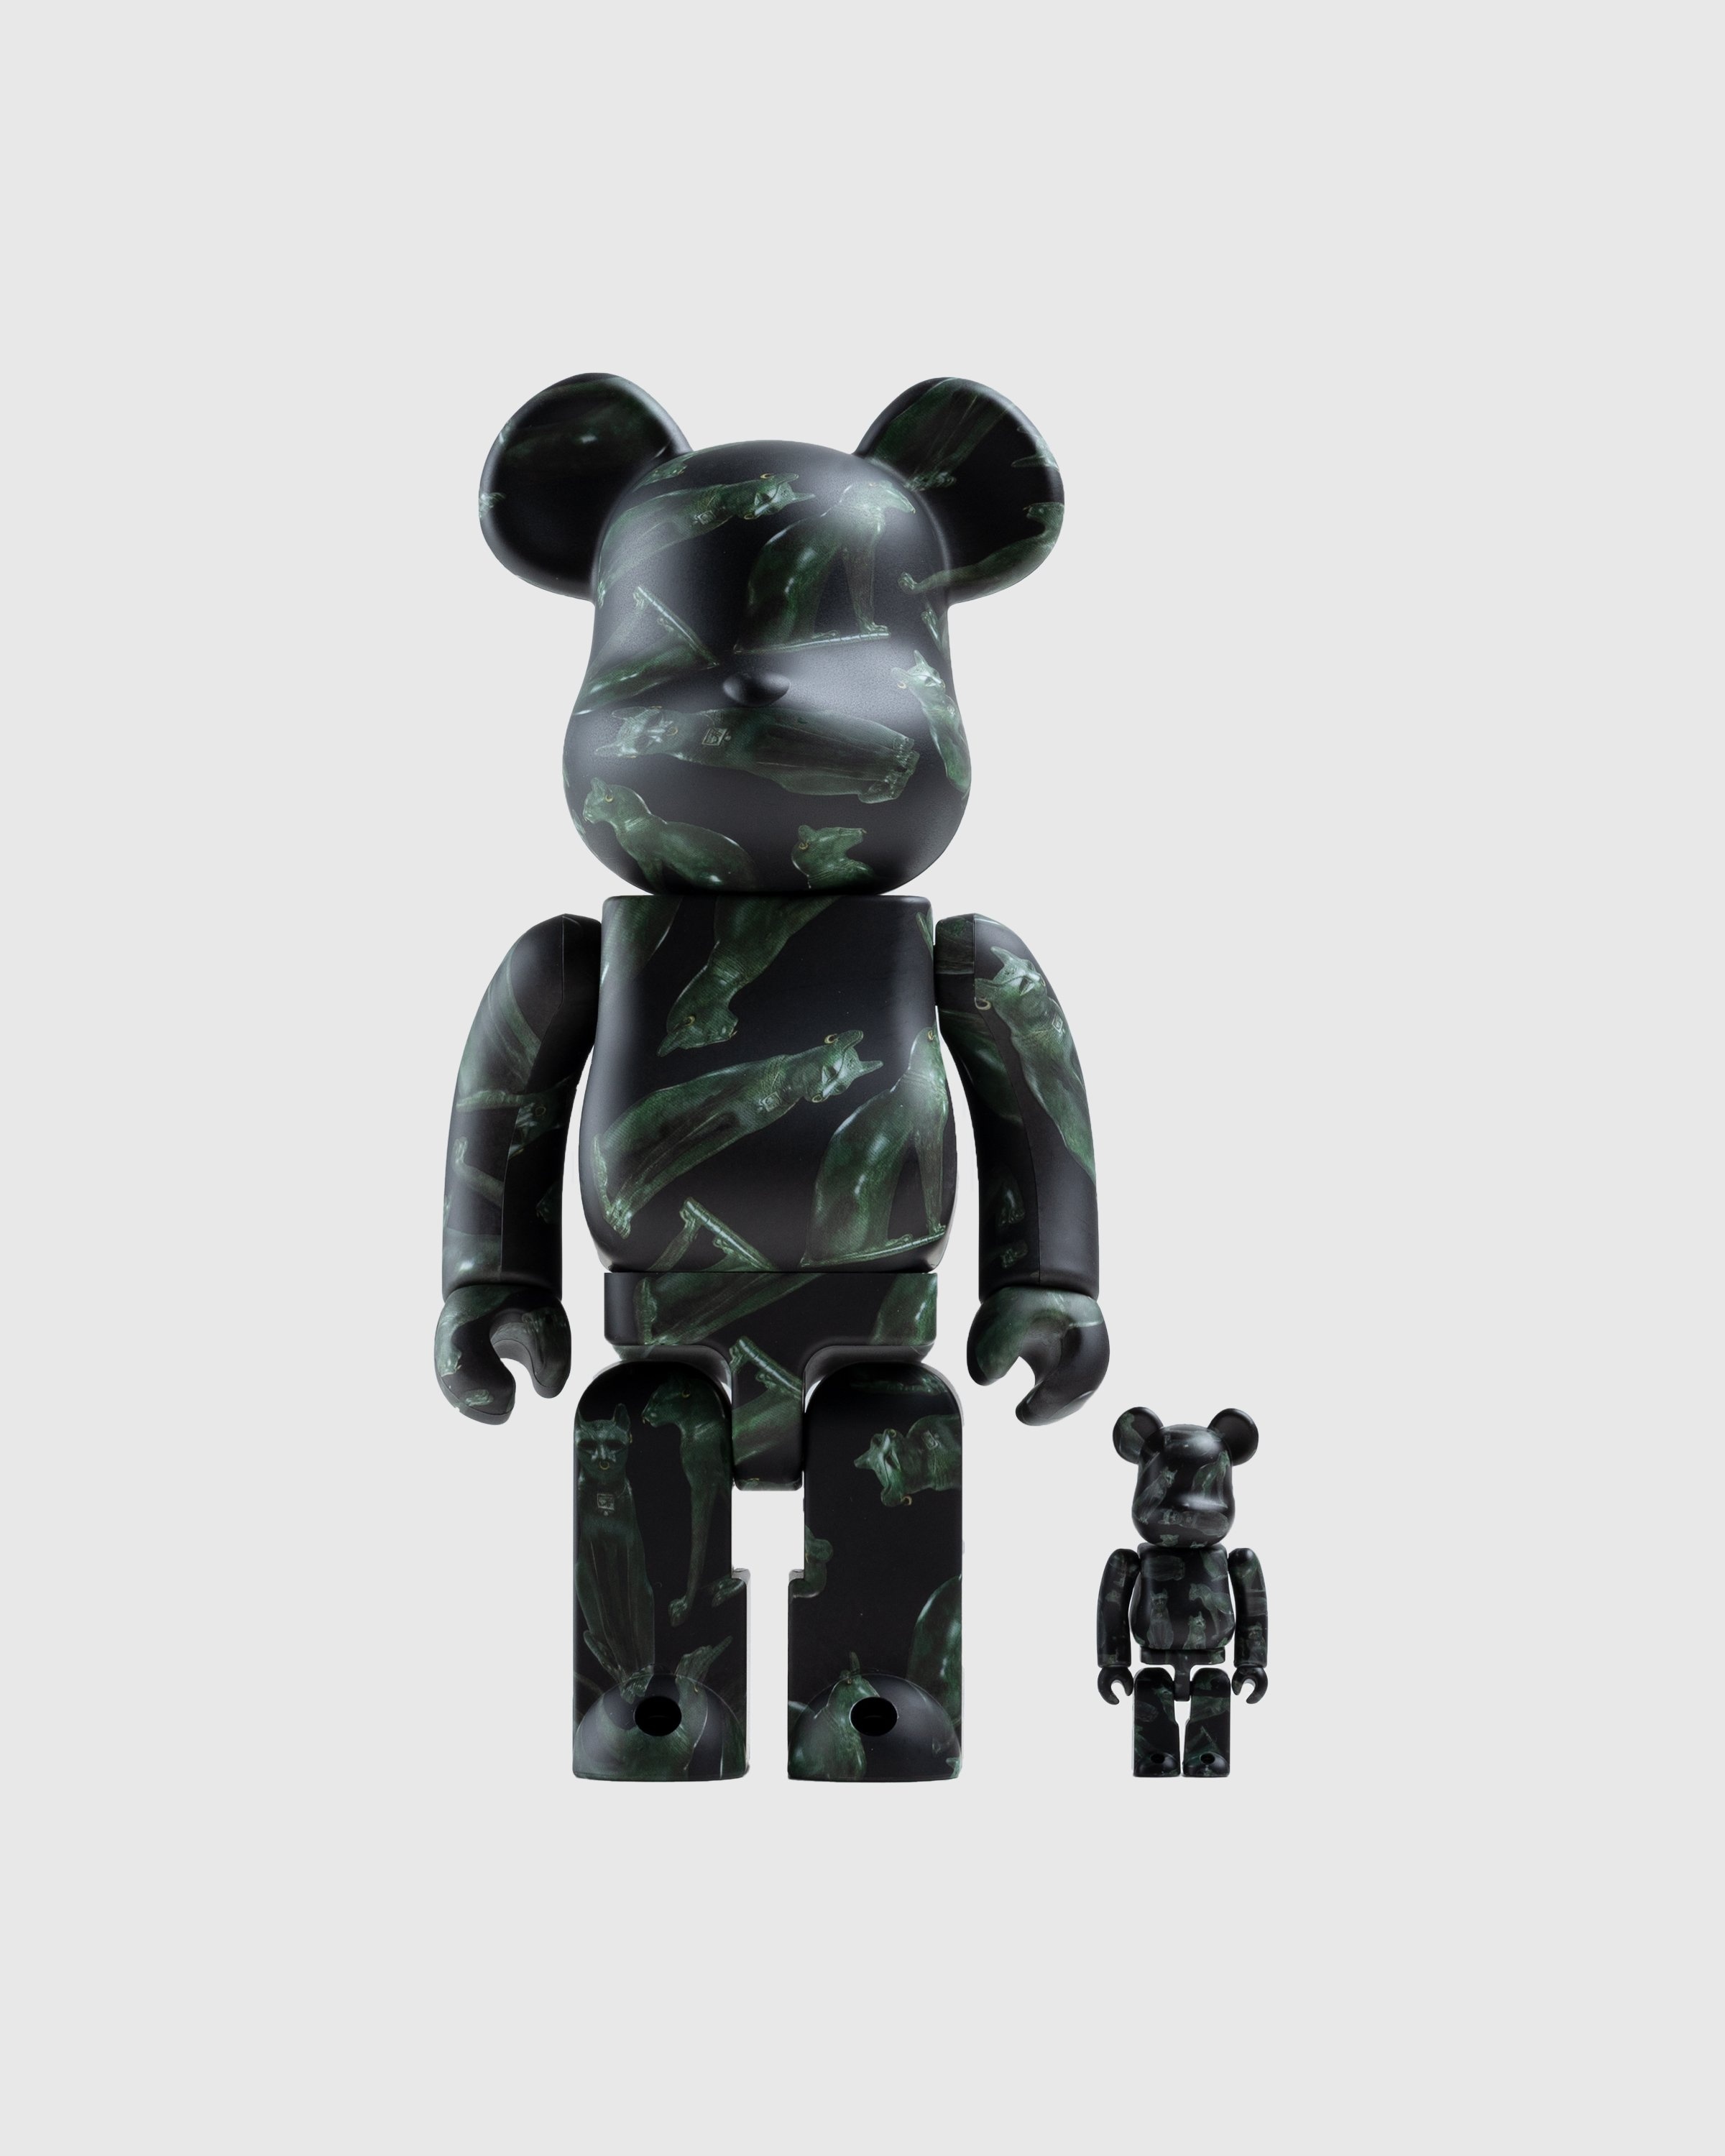 Liberty Leading the People by Eugene Delacroix 400% + 100% Bearbrick C